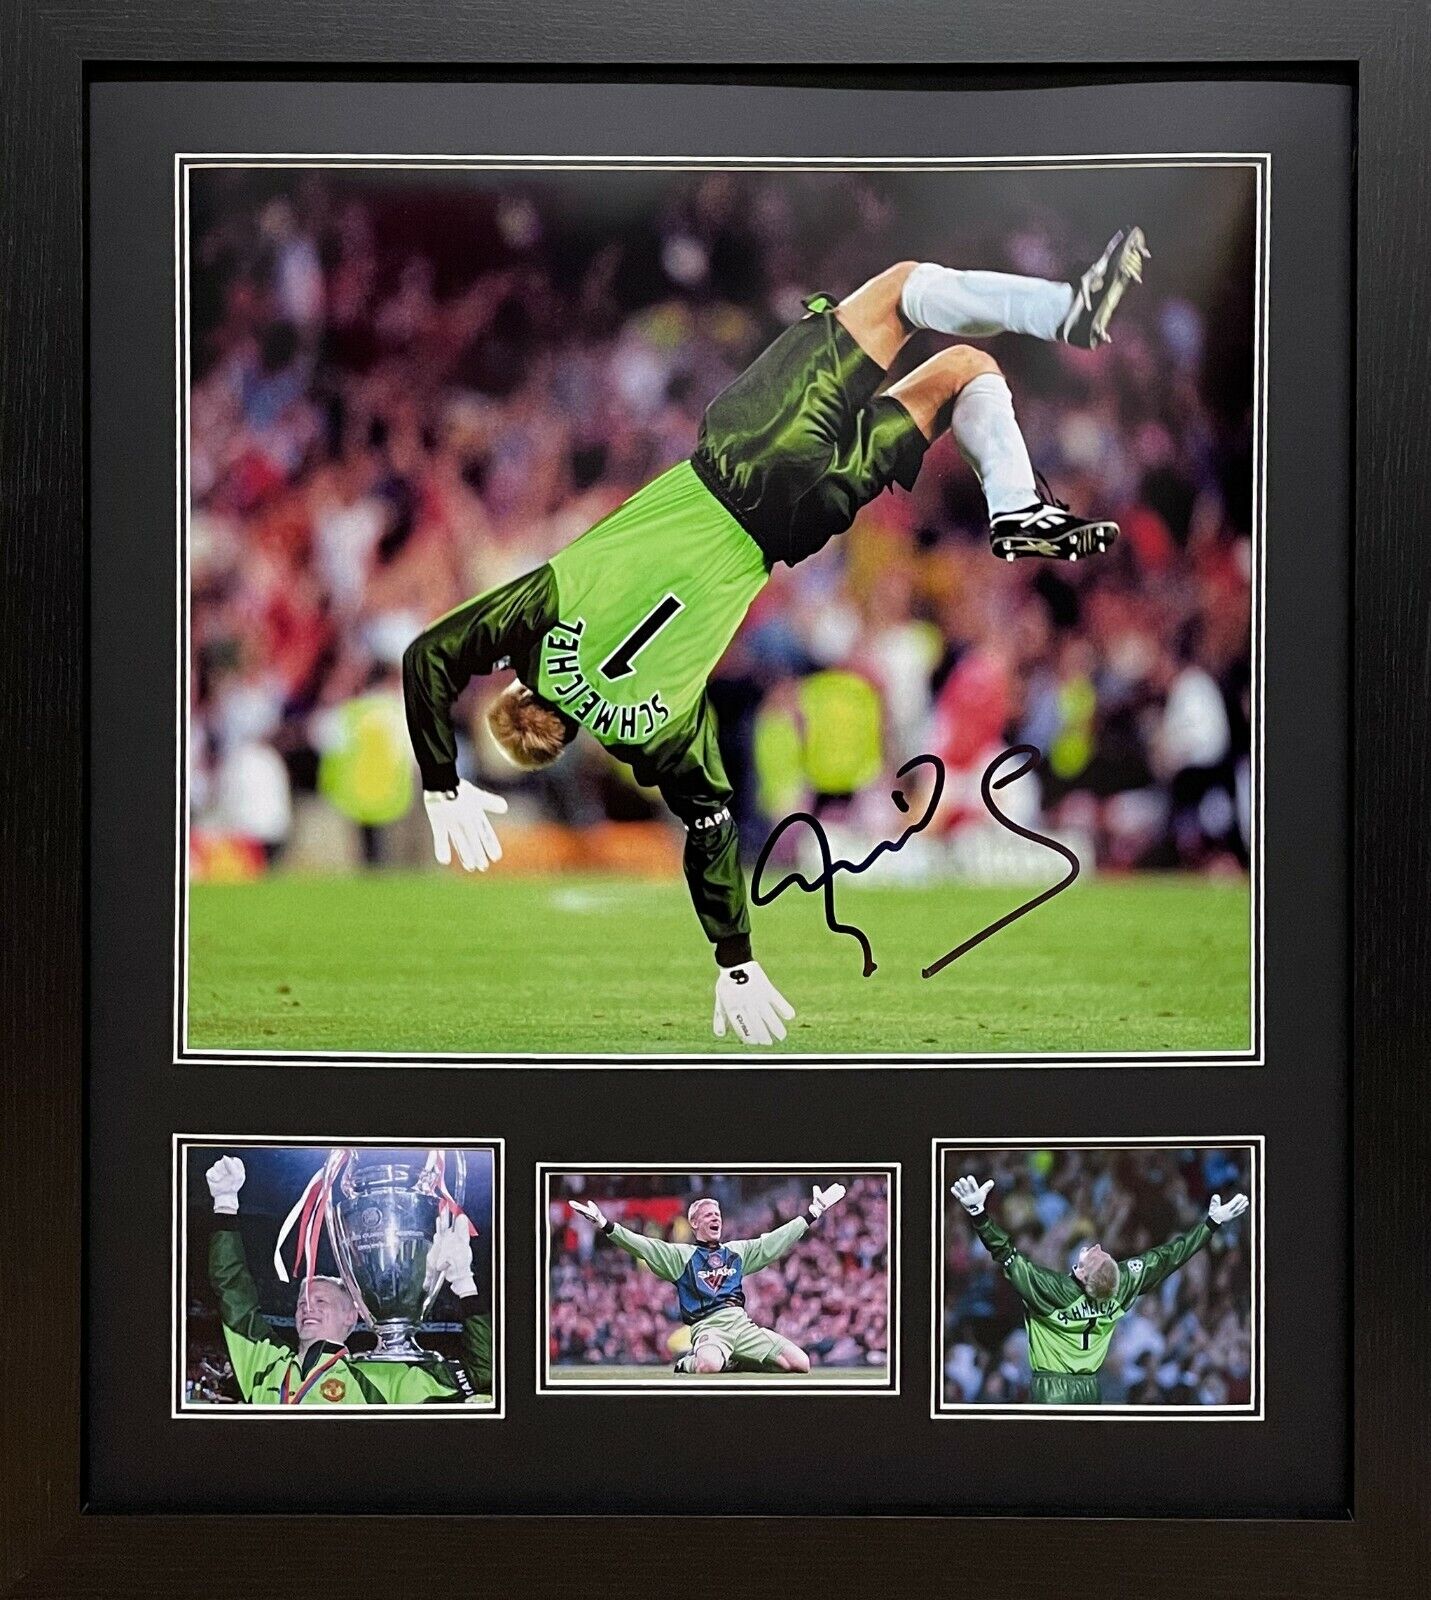 FRAMED SCHMEICHEL SIGNED MANCHESTER UNITED TREBLE 1999 FOOTBALL Photo Poster painting PROOF